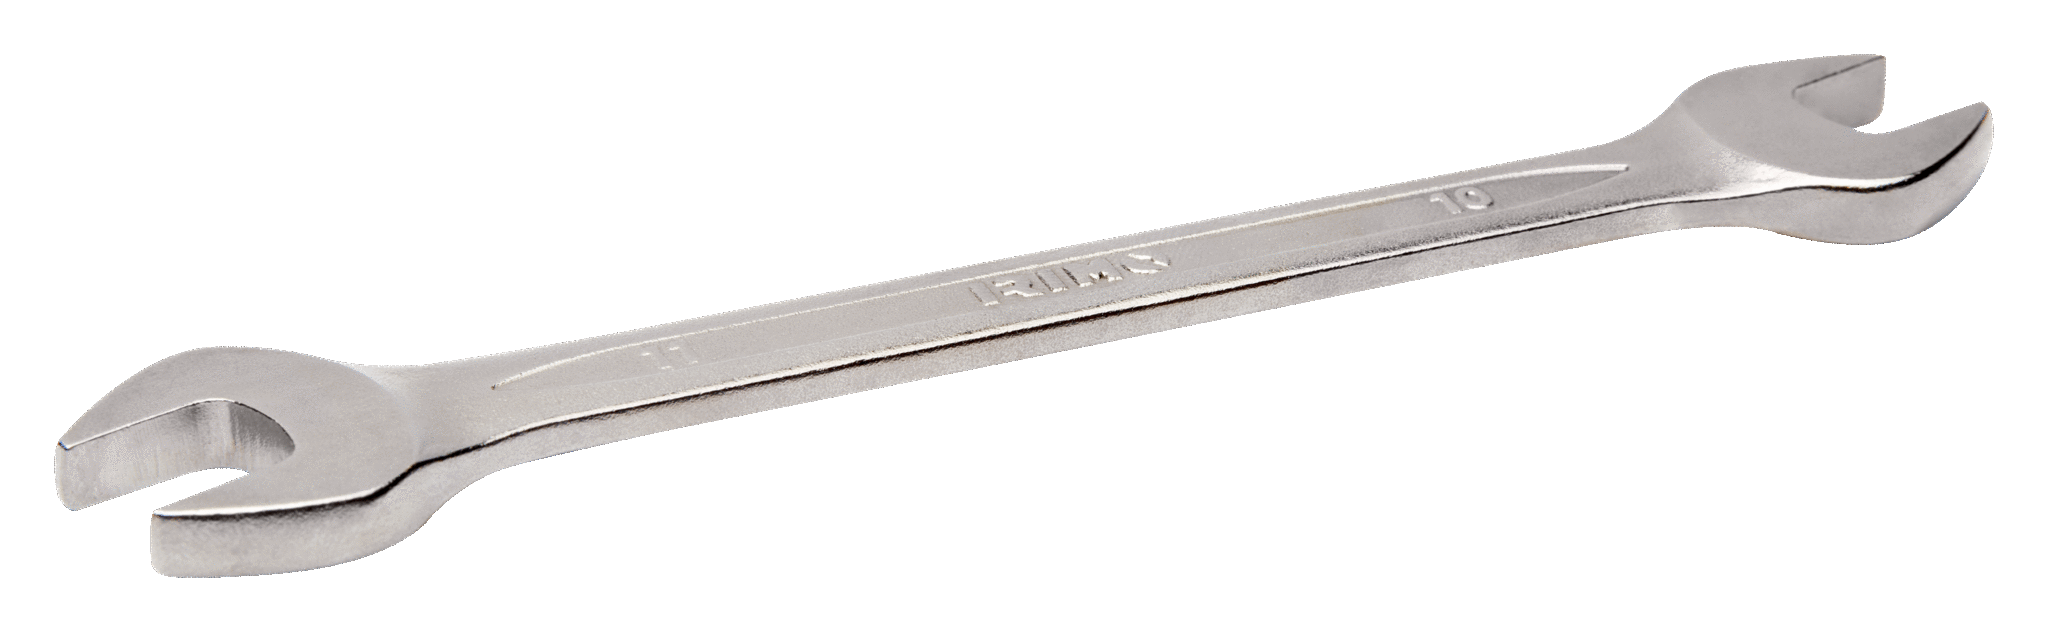 5/8" X 3/4" Details about   URREA 3031 DOUBLE OPEN-END WRENCH 4F9-006 